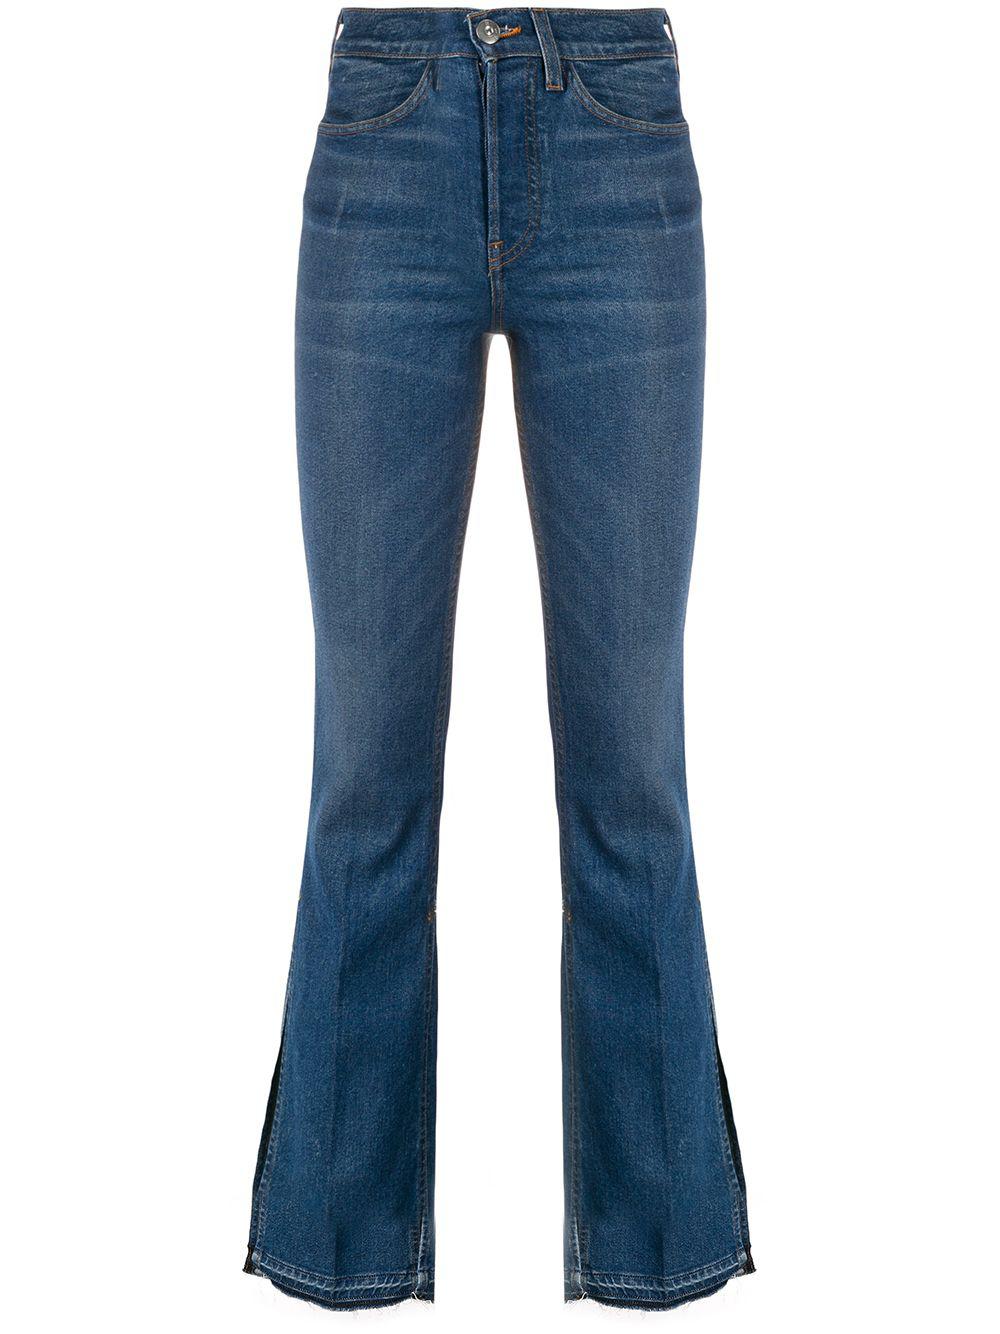 PAIGE Denim Genevieve Transcend Blue Flared Jeans Womens Clothing Jeans Flare and bell bottom jeans 